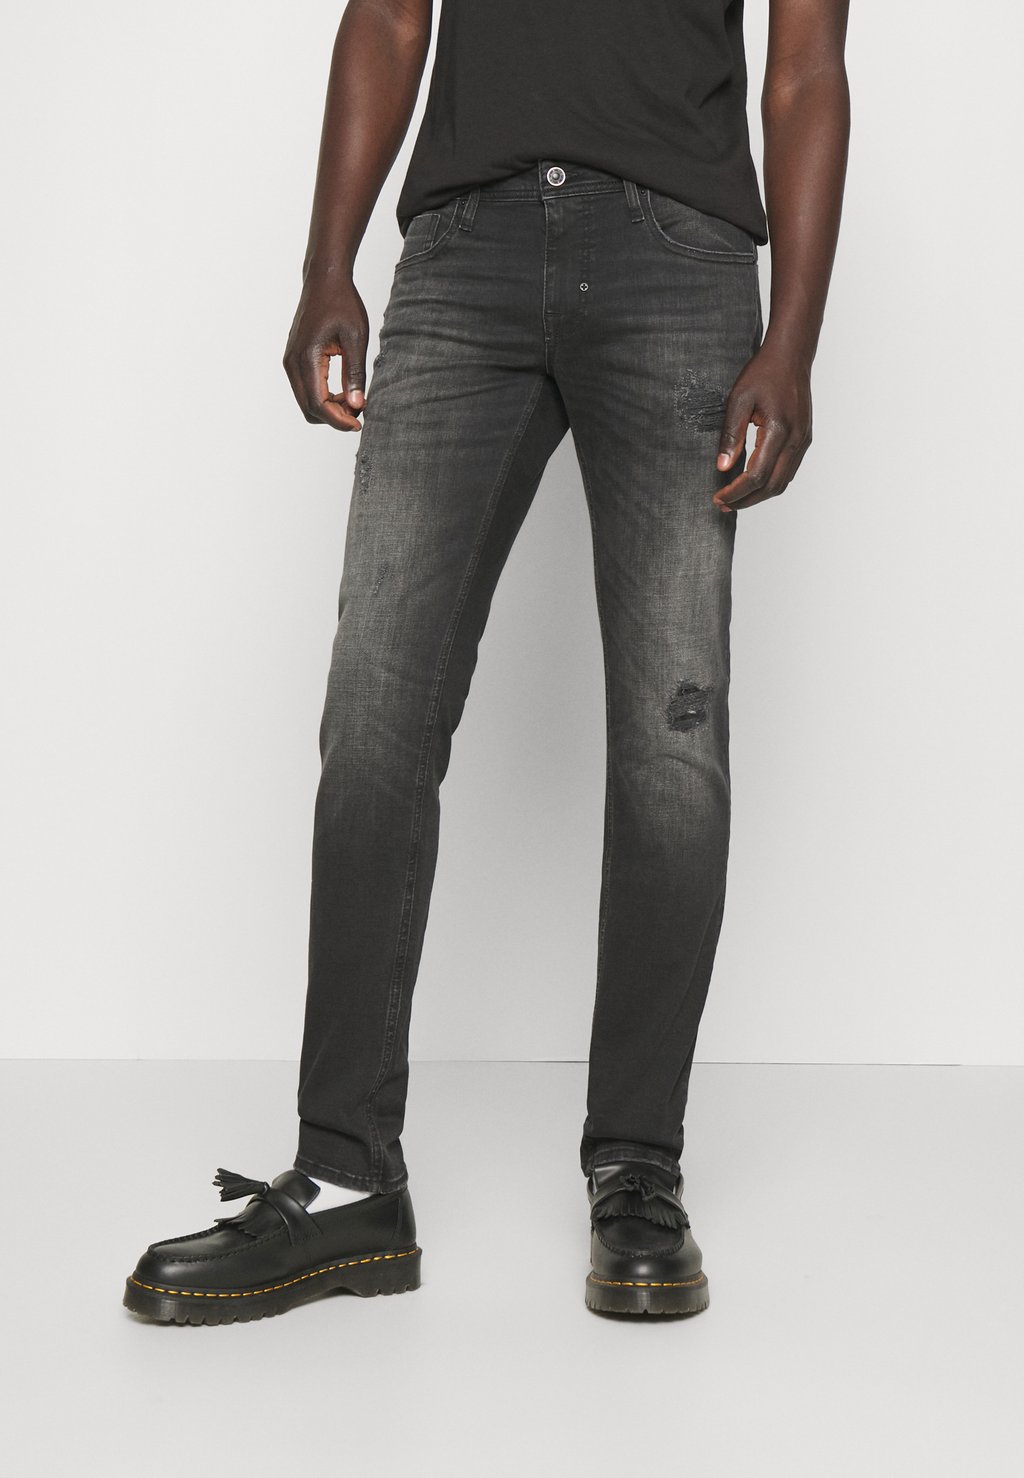 Джинсы Tapered Fit Ozzy Tapered Fit Jeans In Black Wash Stretch Denim Antony Morato, цвет black denim джинсы tapered fit ozzy antony morato цвет black